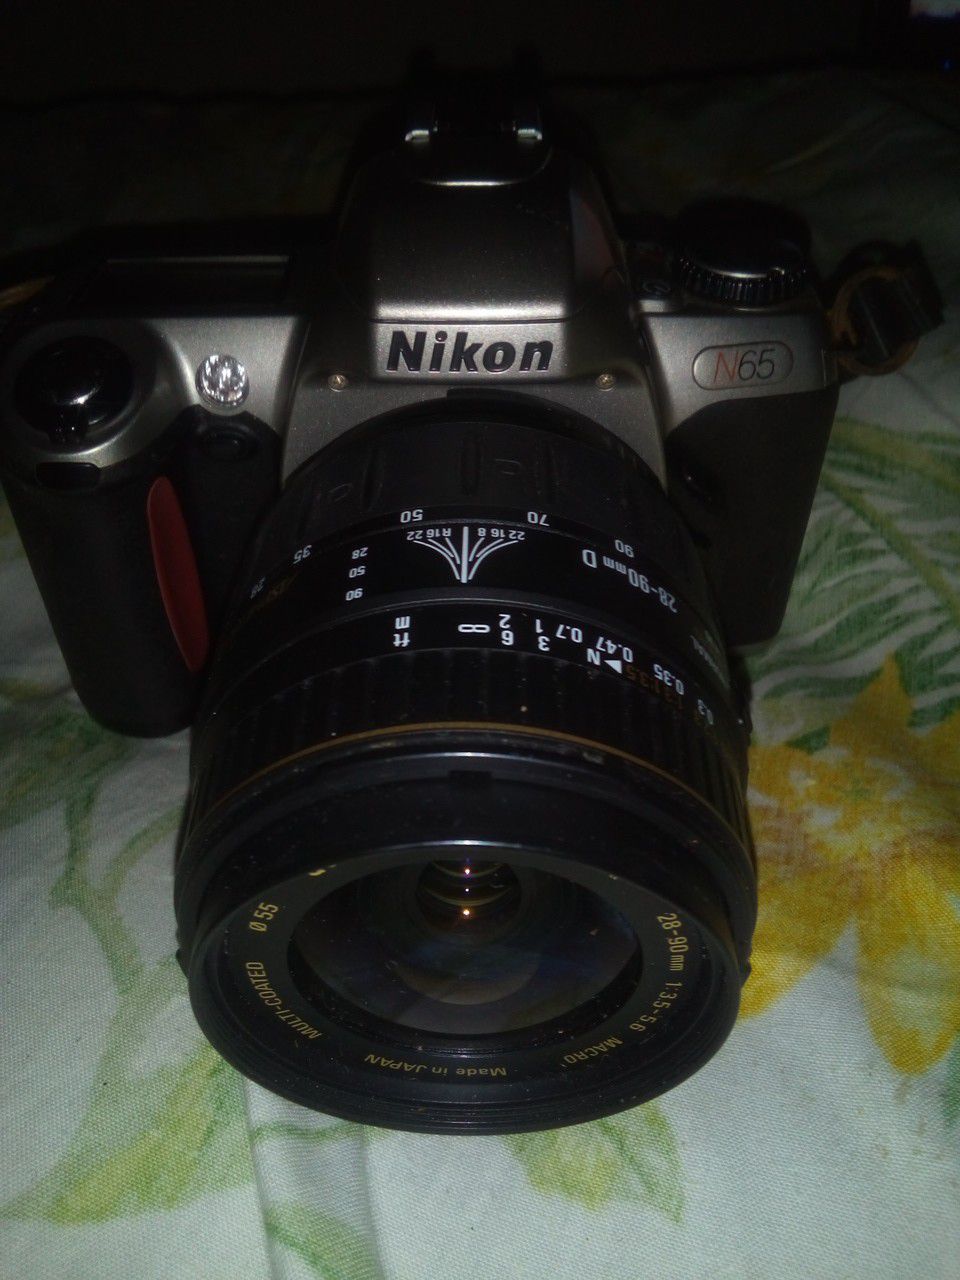 Nikon N65 Camera, perfect for studying photography